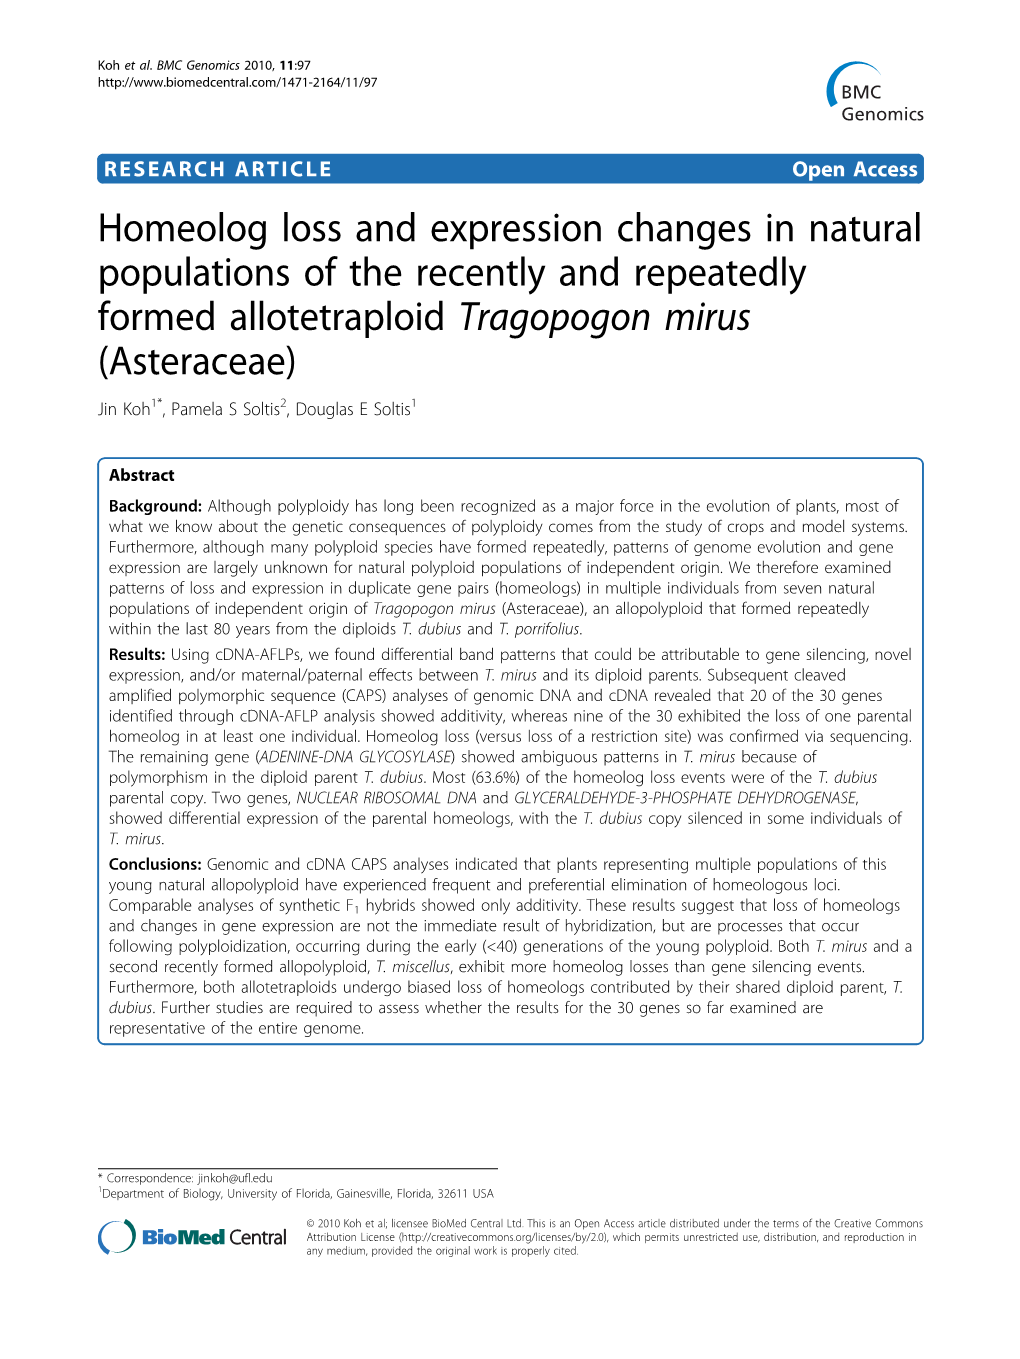 Homeolog Loss and Expression Changes in Natural Populations Of